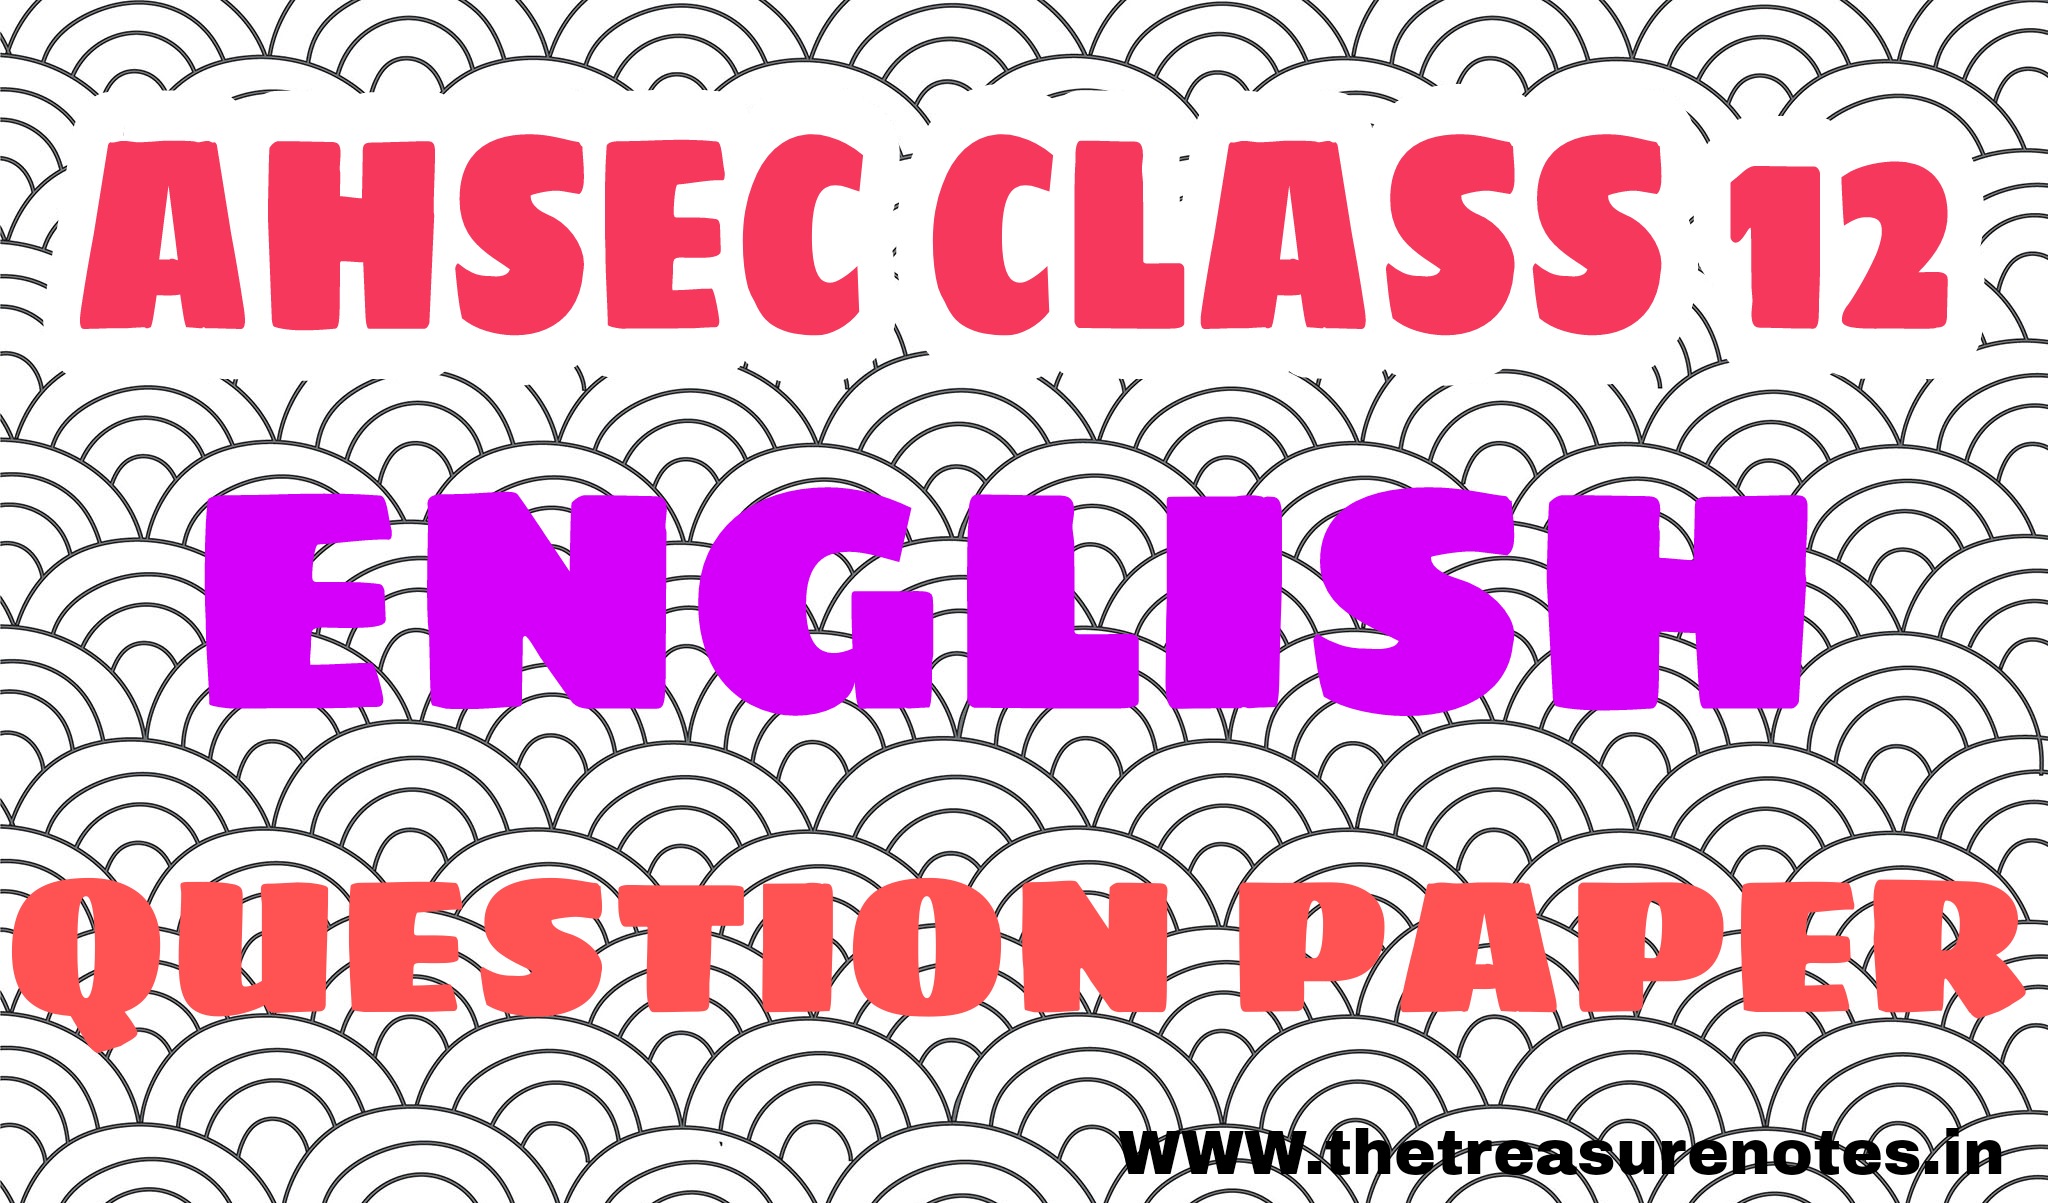 AHSEC Class 12 English Question paper'2016 | HS 2nd Year English Question paper 2016, Download Assam Class 12 English Question paper 2016,Hs 2nd year English Question paper